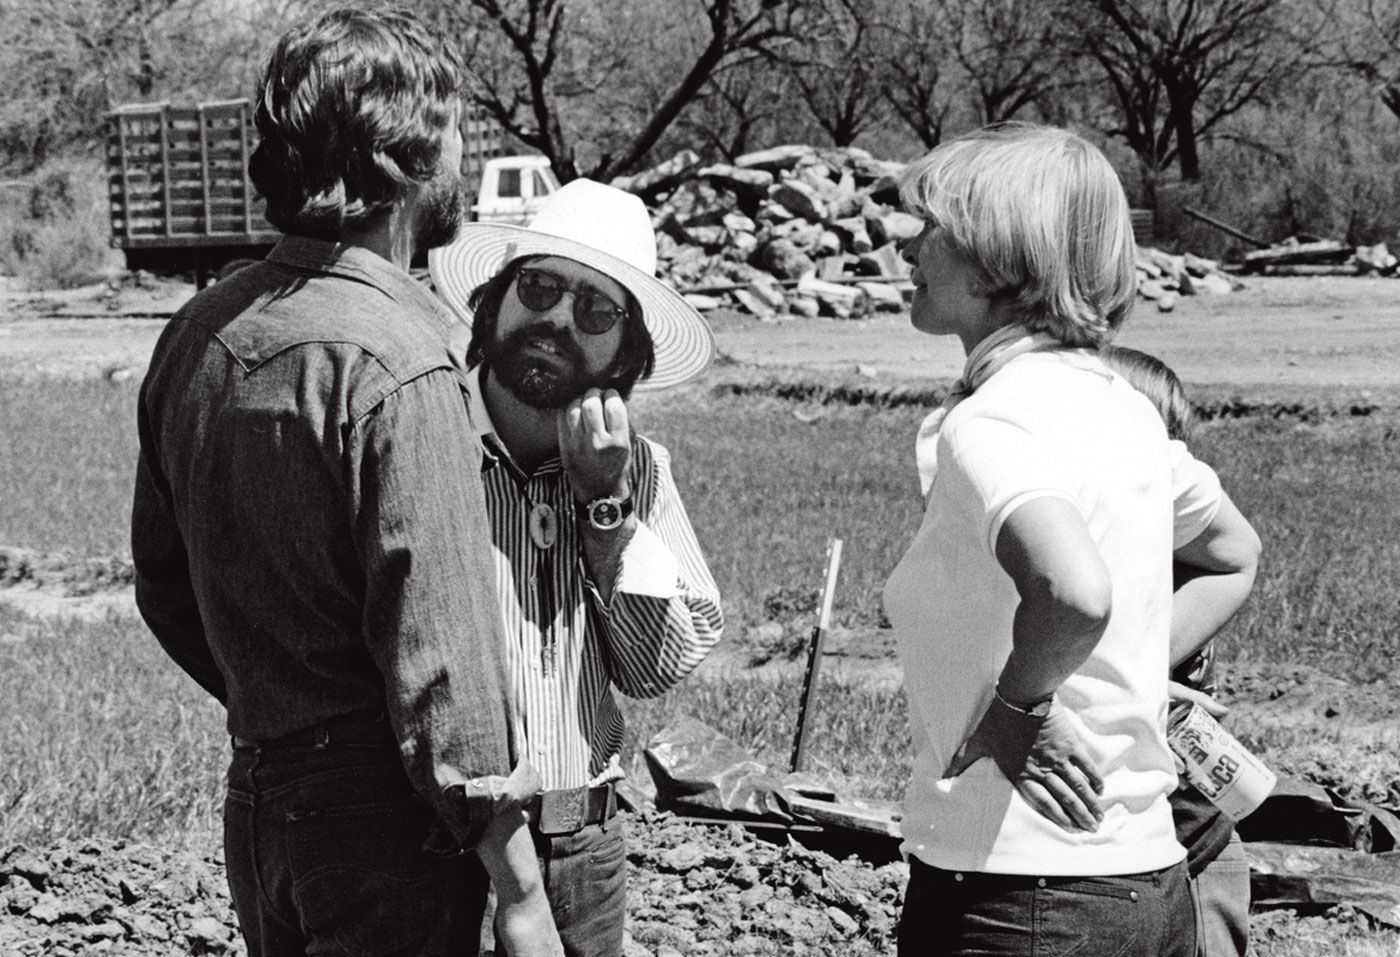 Martin Scorsese, Ellen Burstyn and Kris Kristofferson on the Set of Alice Doesn't Live Here Anymore